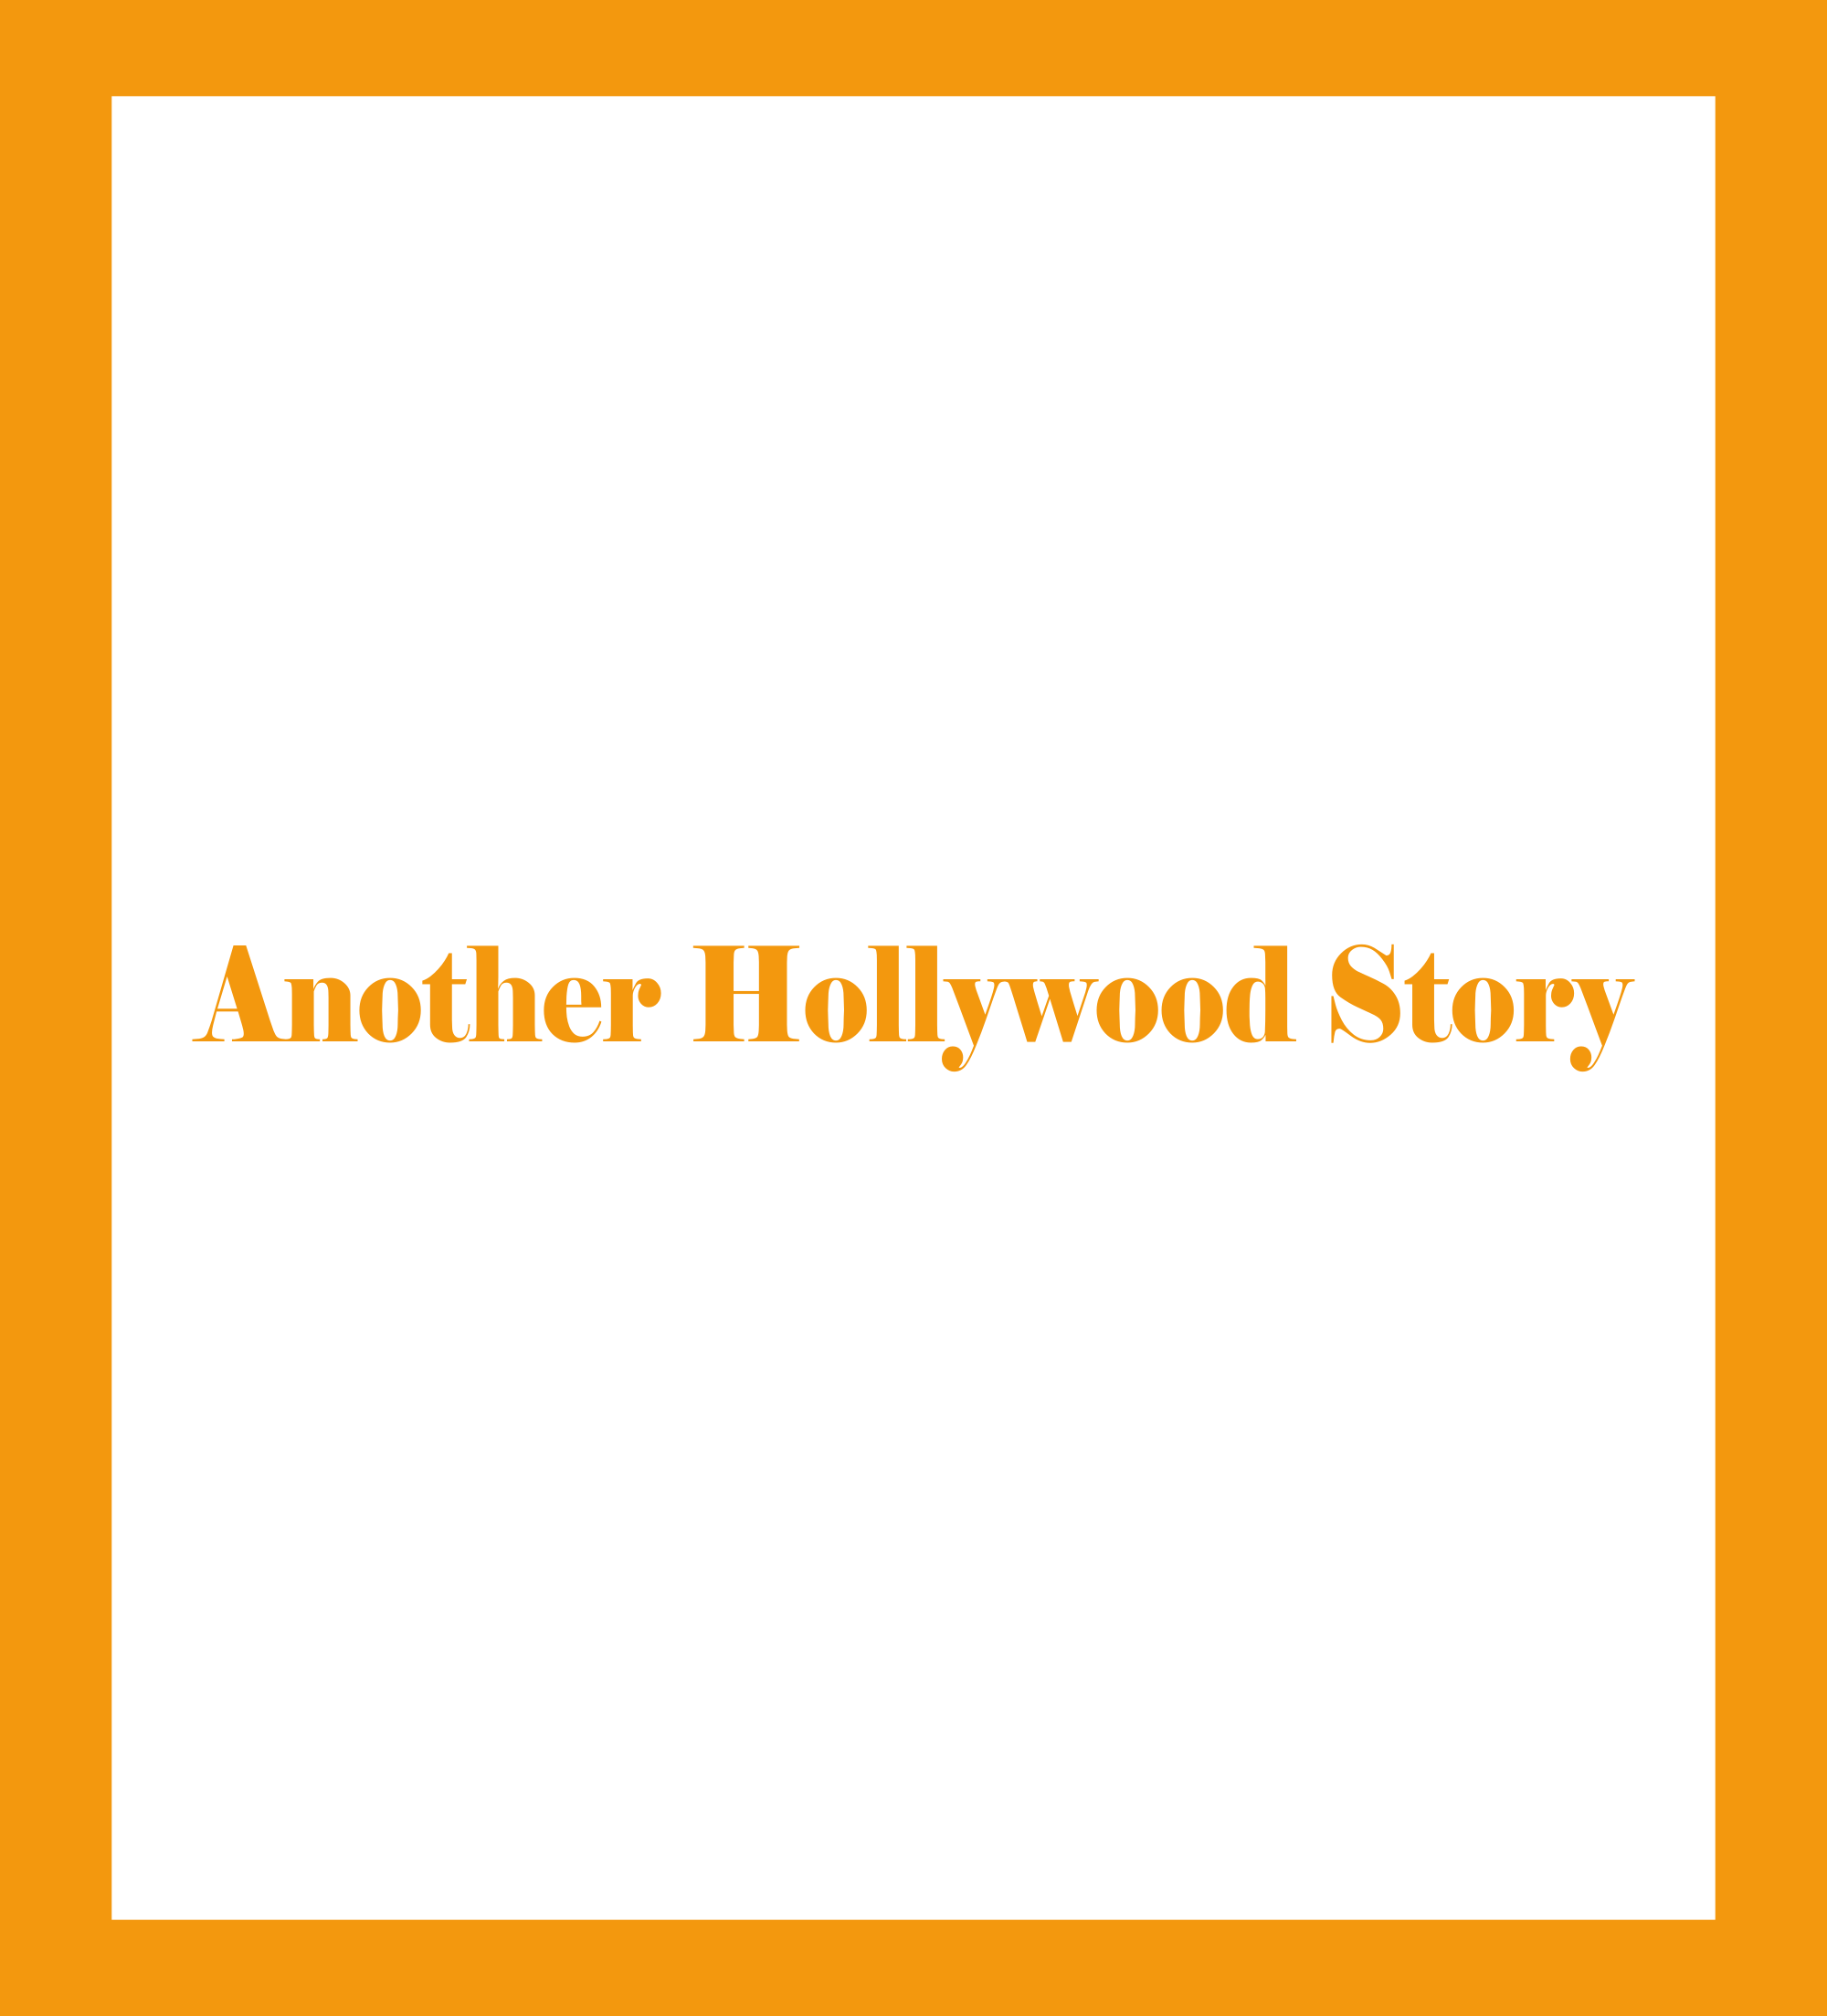 Another Hollywood Story